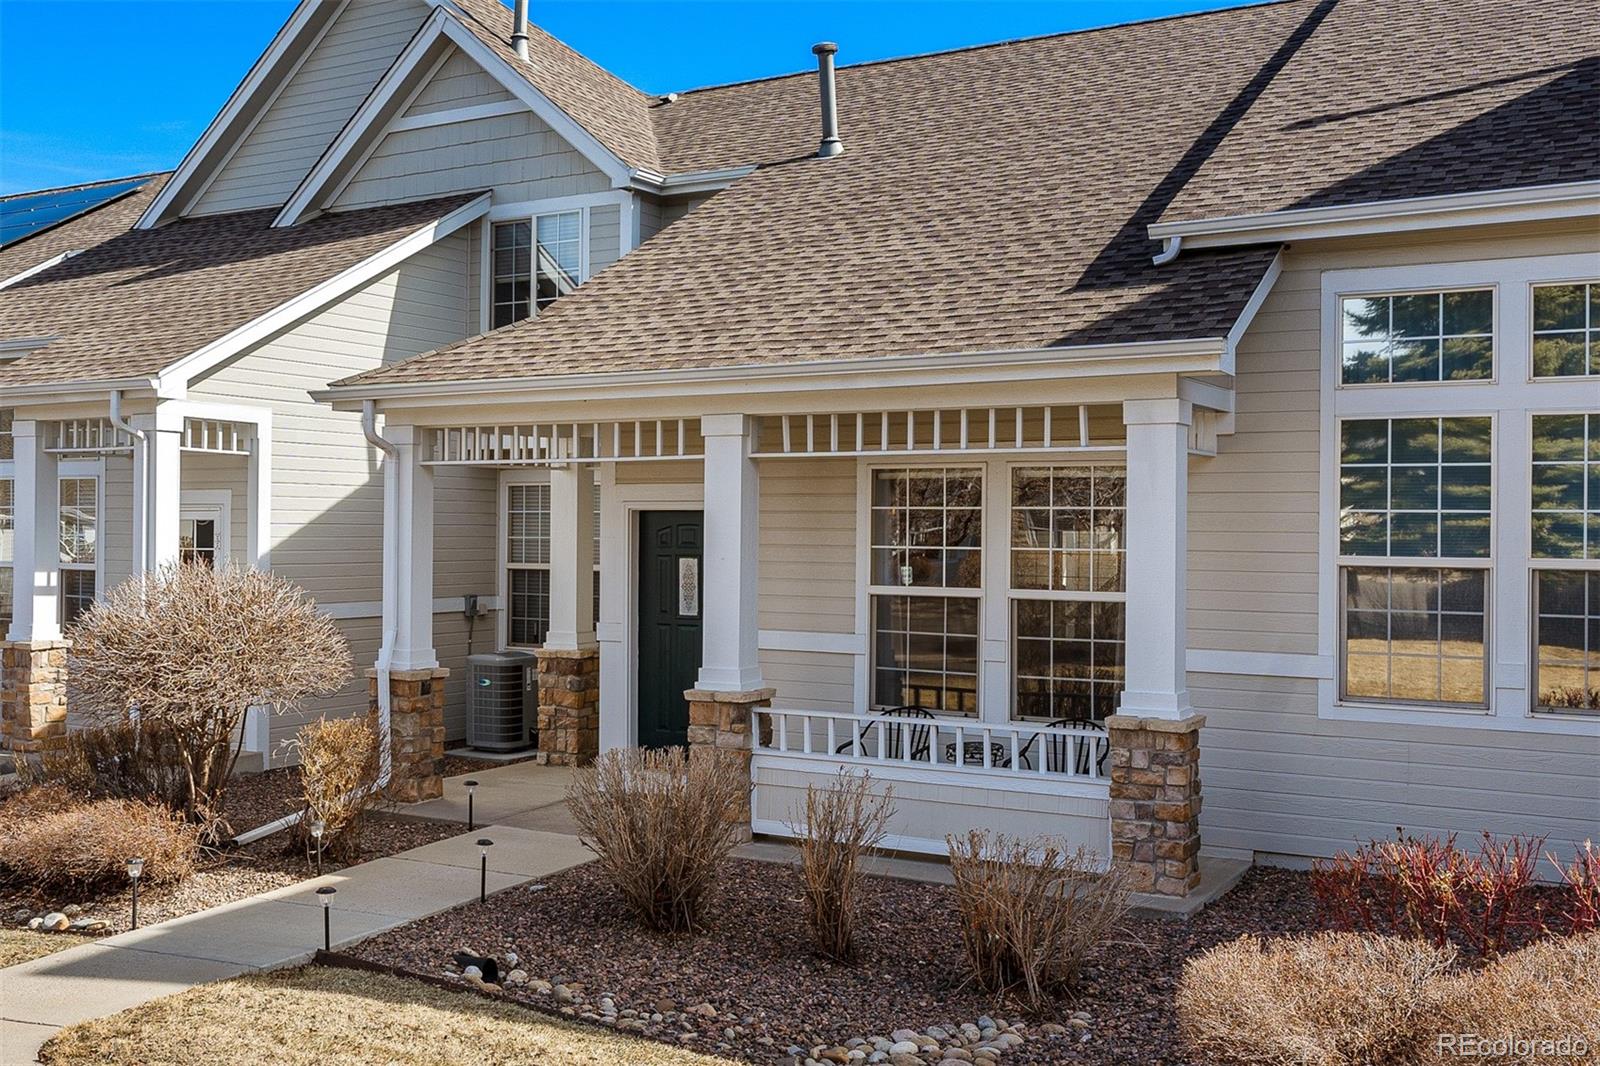 8300  fairmount drive, Denver sold home. Closed on 2024-04-10 for $540,000.